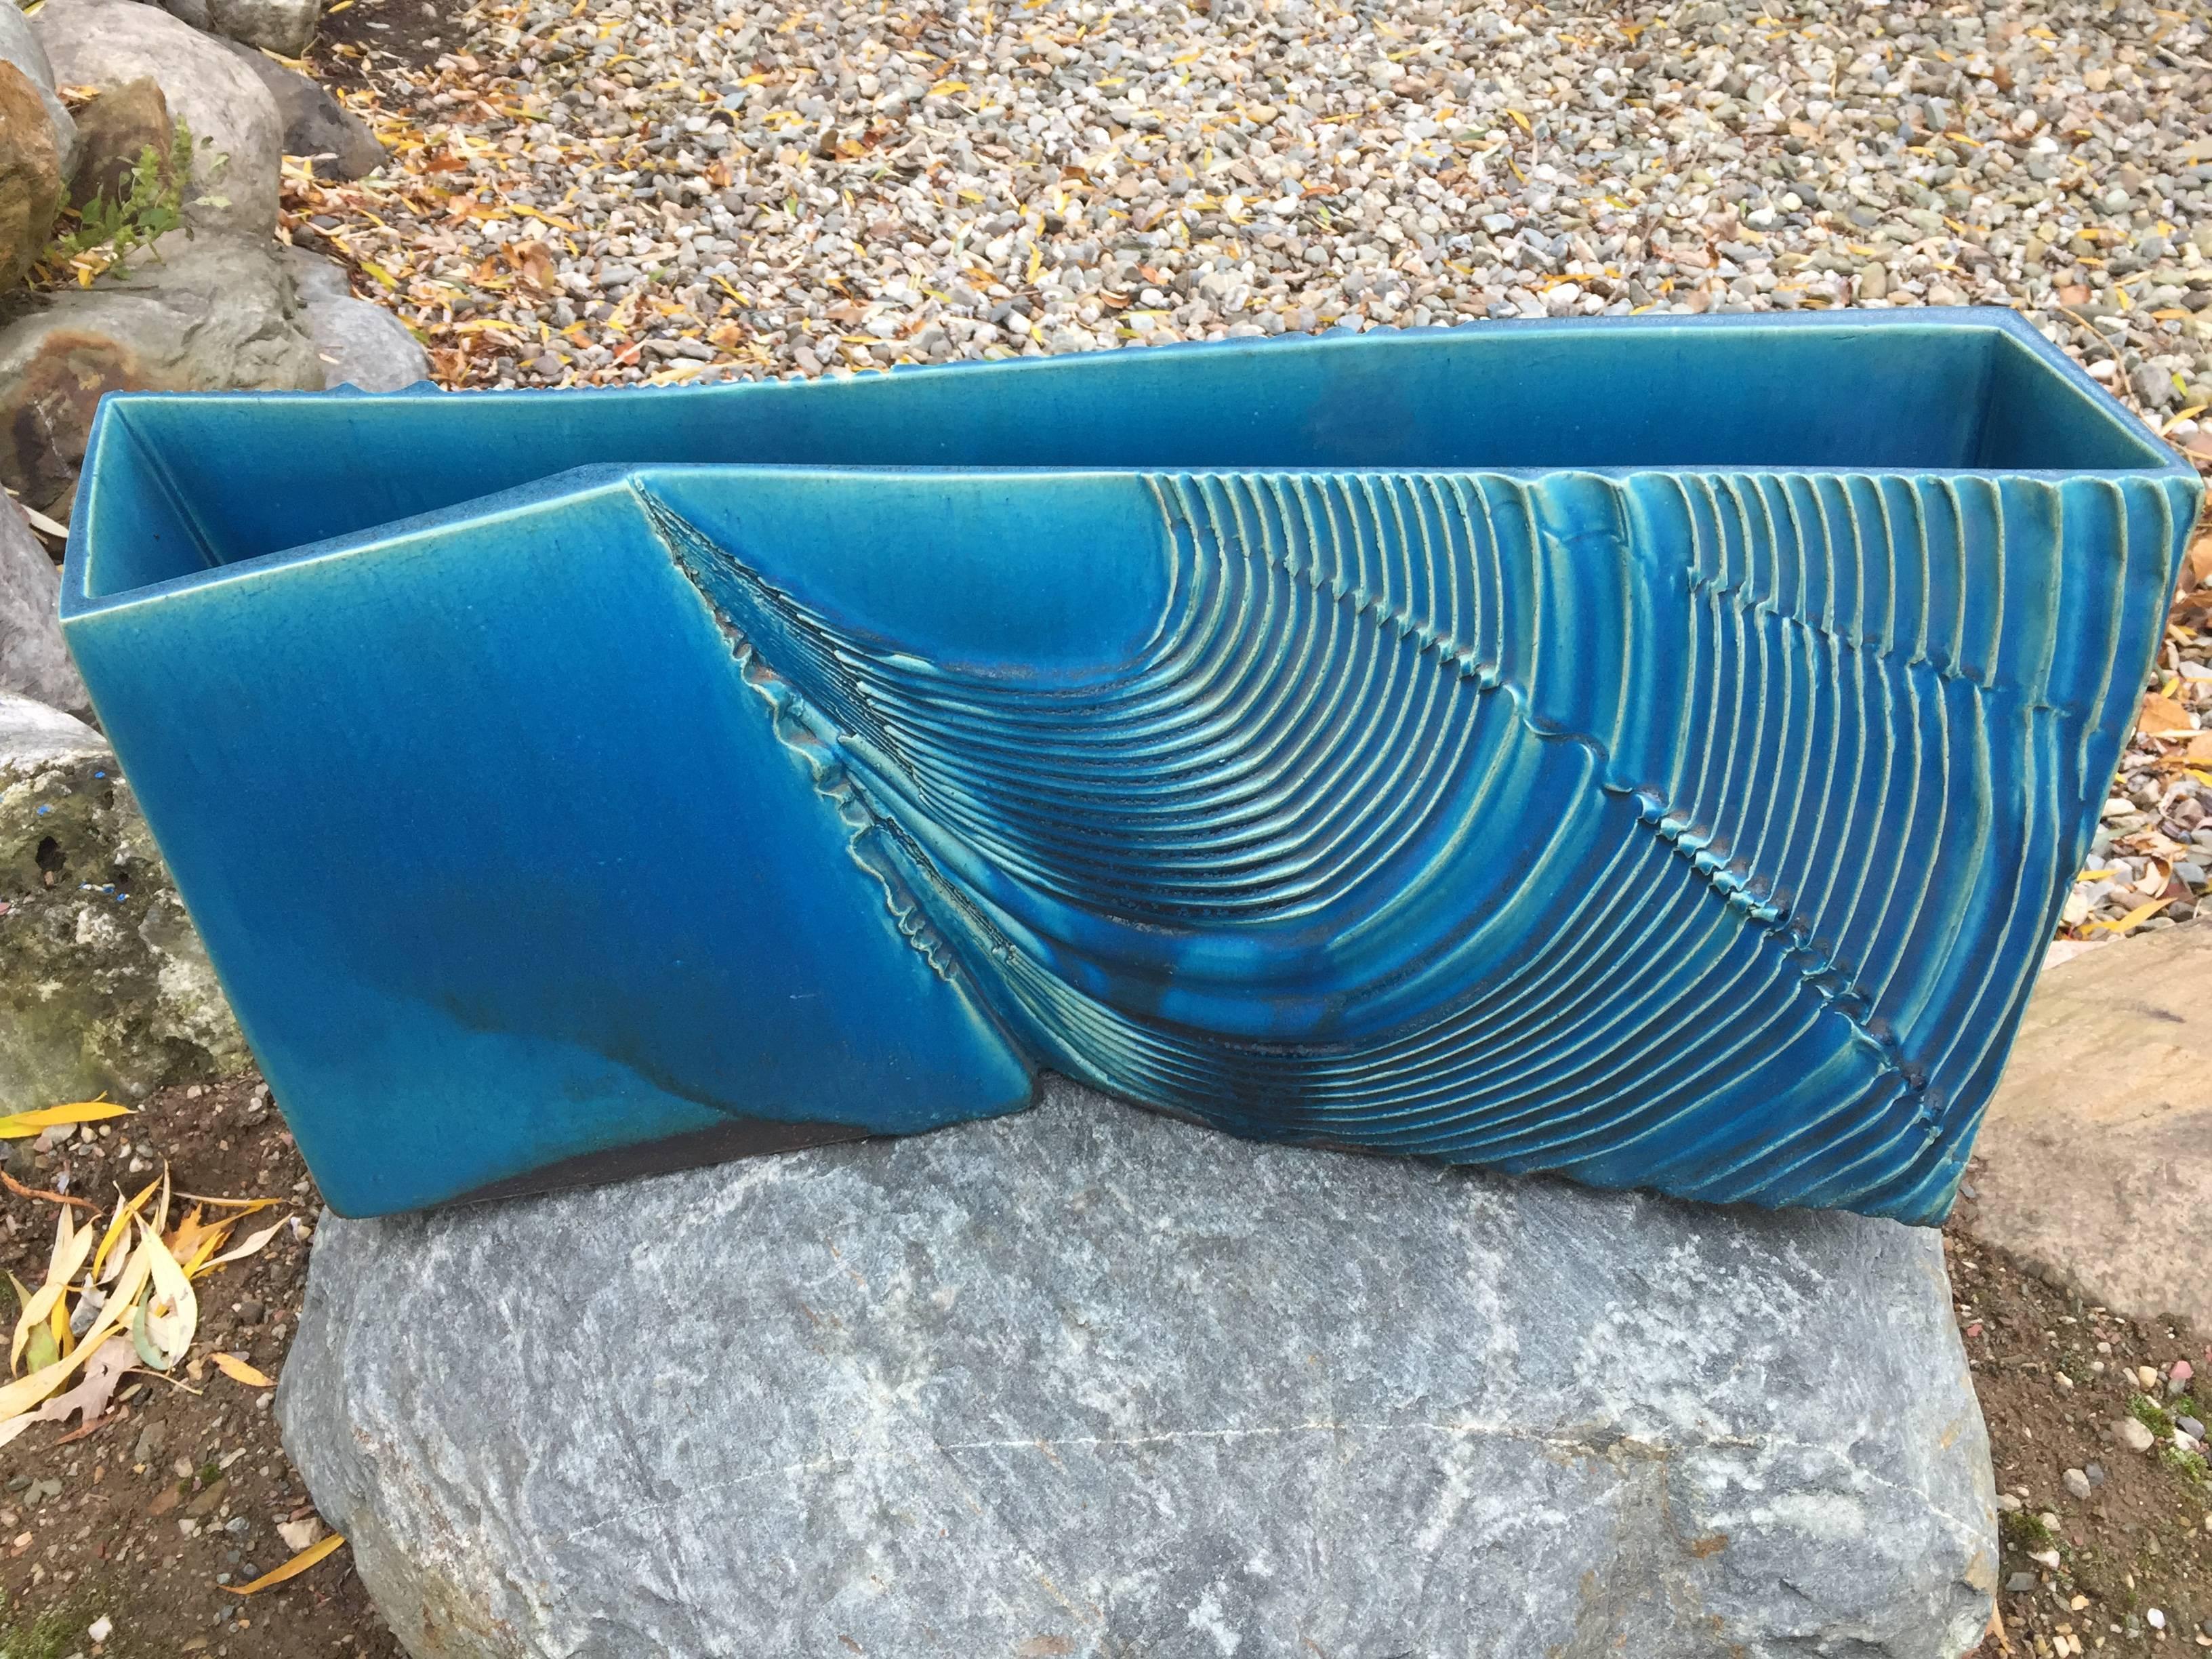 Mint, Signed and Boxed

A superb large-scale Japanese ikebana planter crafted in a beautiful blue glazed ceramic swirling wave pattern. 

It is signed and likely one-of-a-kind..

Included is the original signed collector storage box tomobako.

Hand